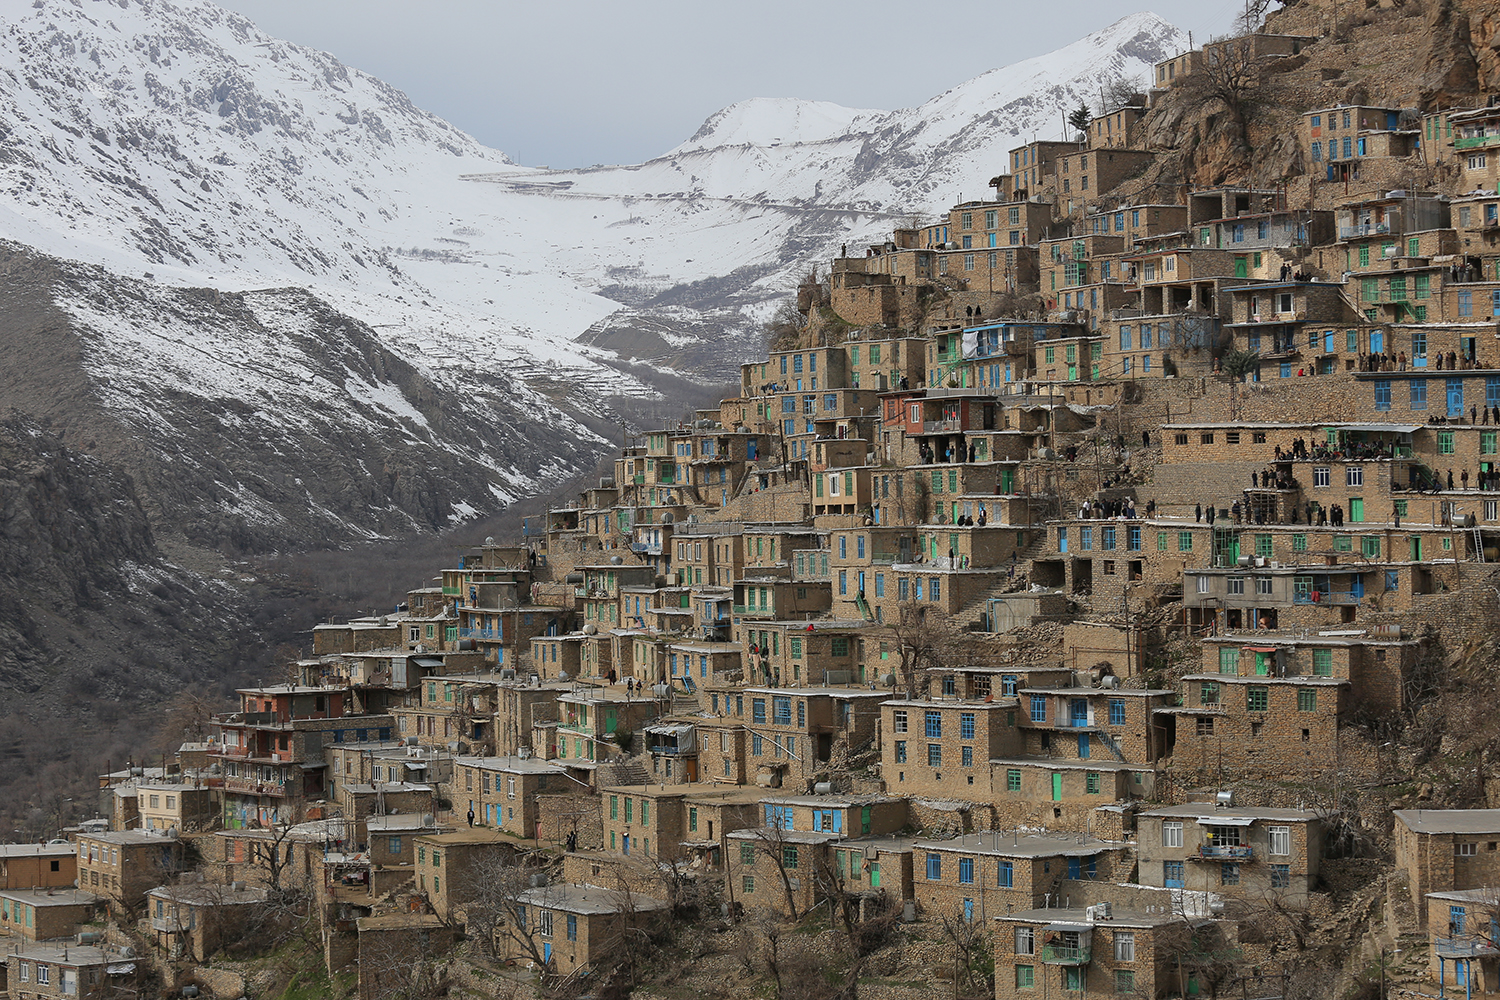 VIllage built into the mountainside, consisting of simple terraced stone houses (photo: Konstantin Novakovic)